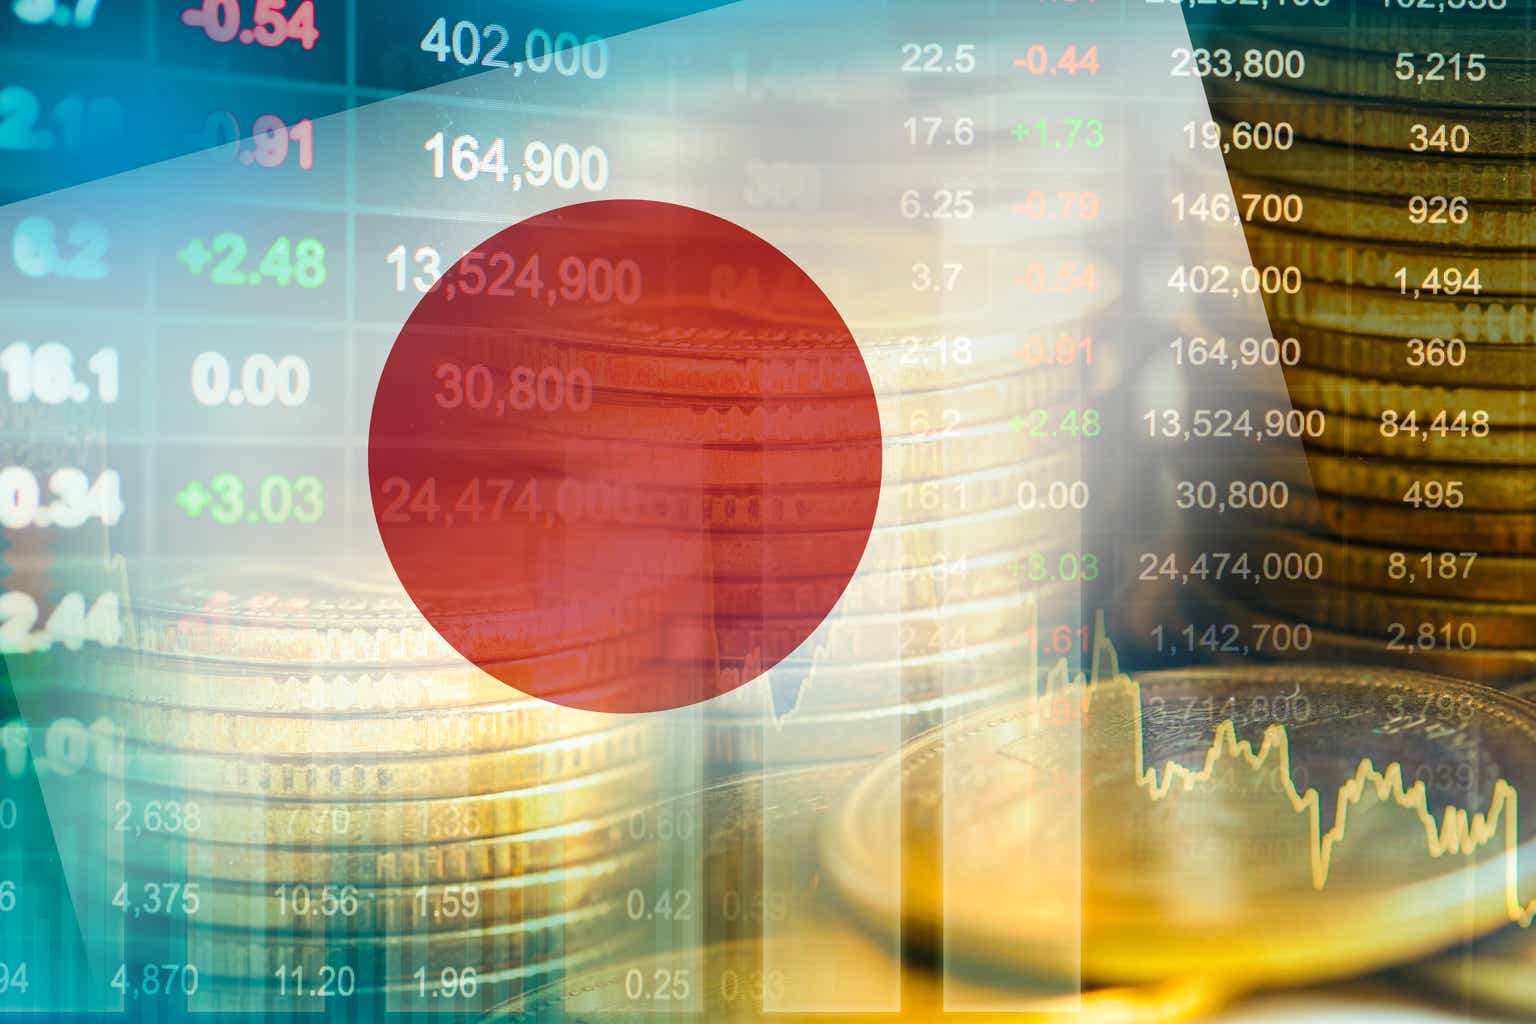 Japan Ends Its Negative Interest Rate Policy